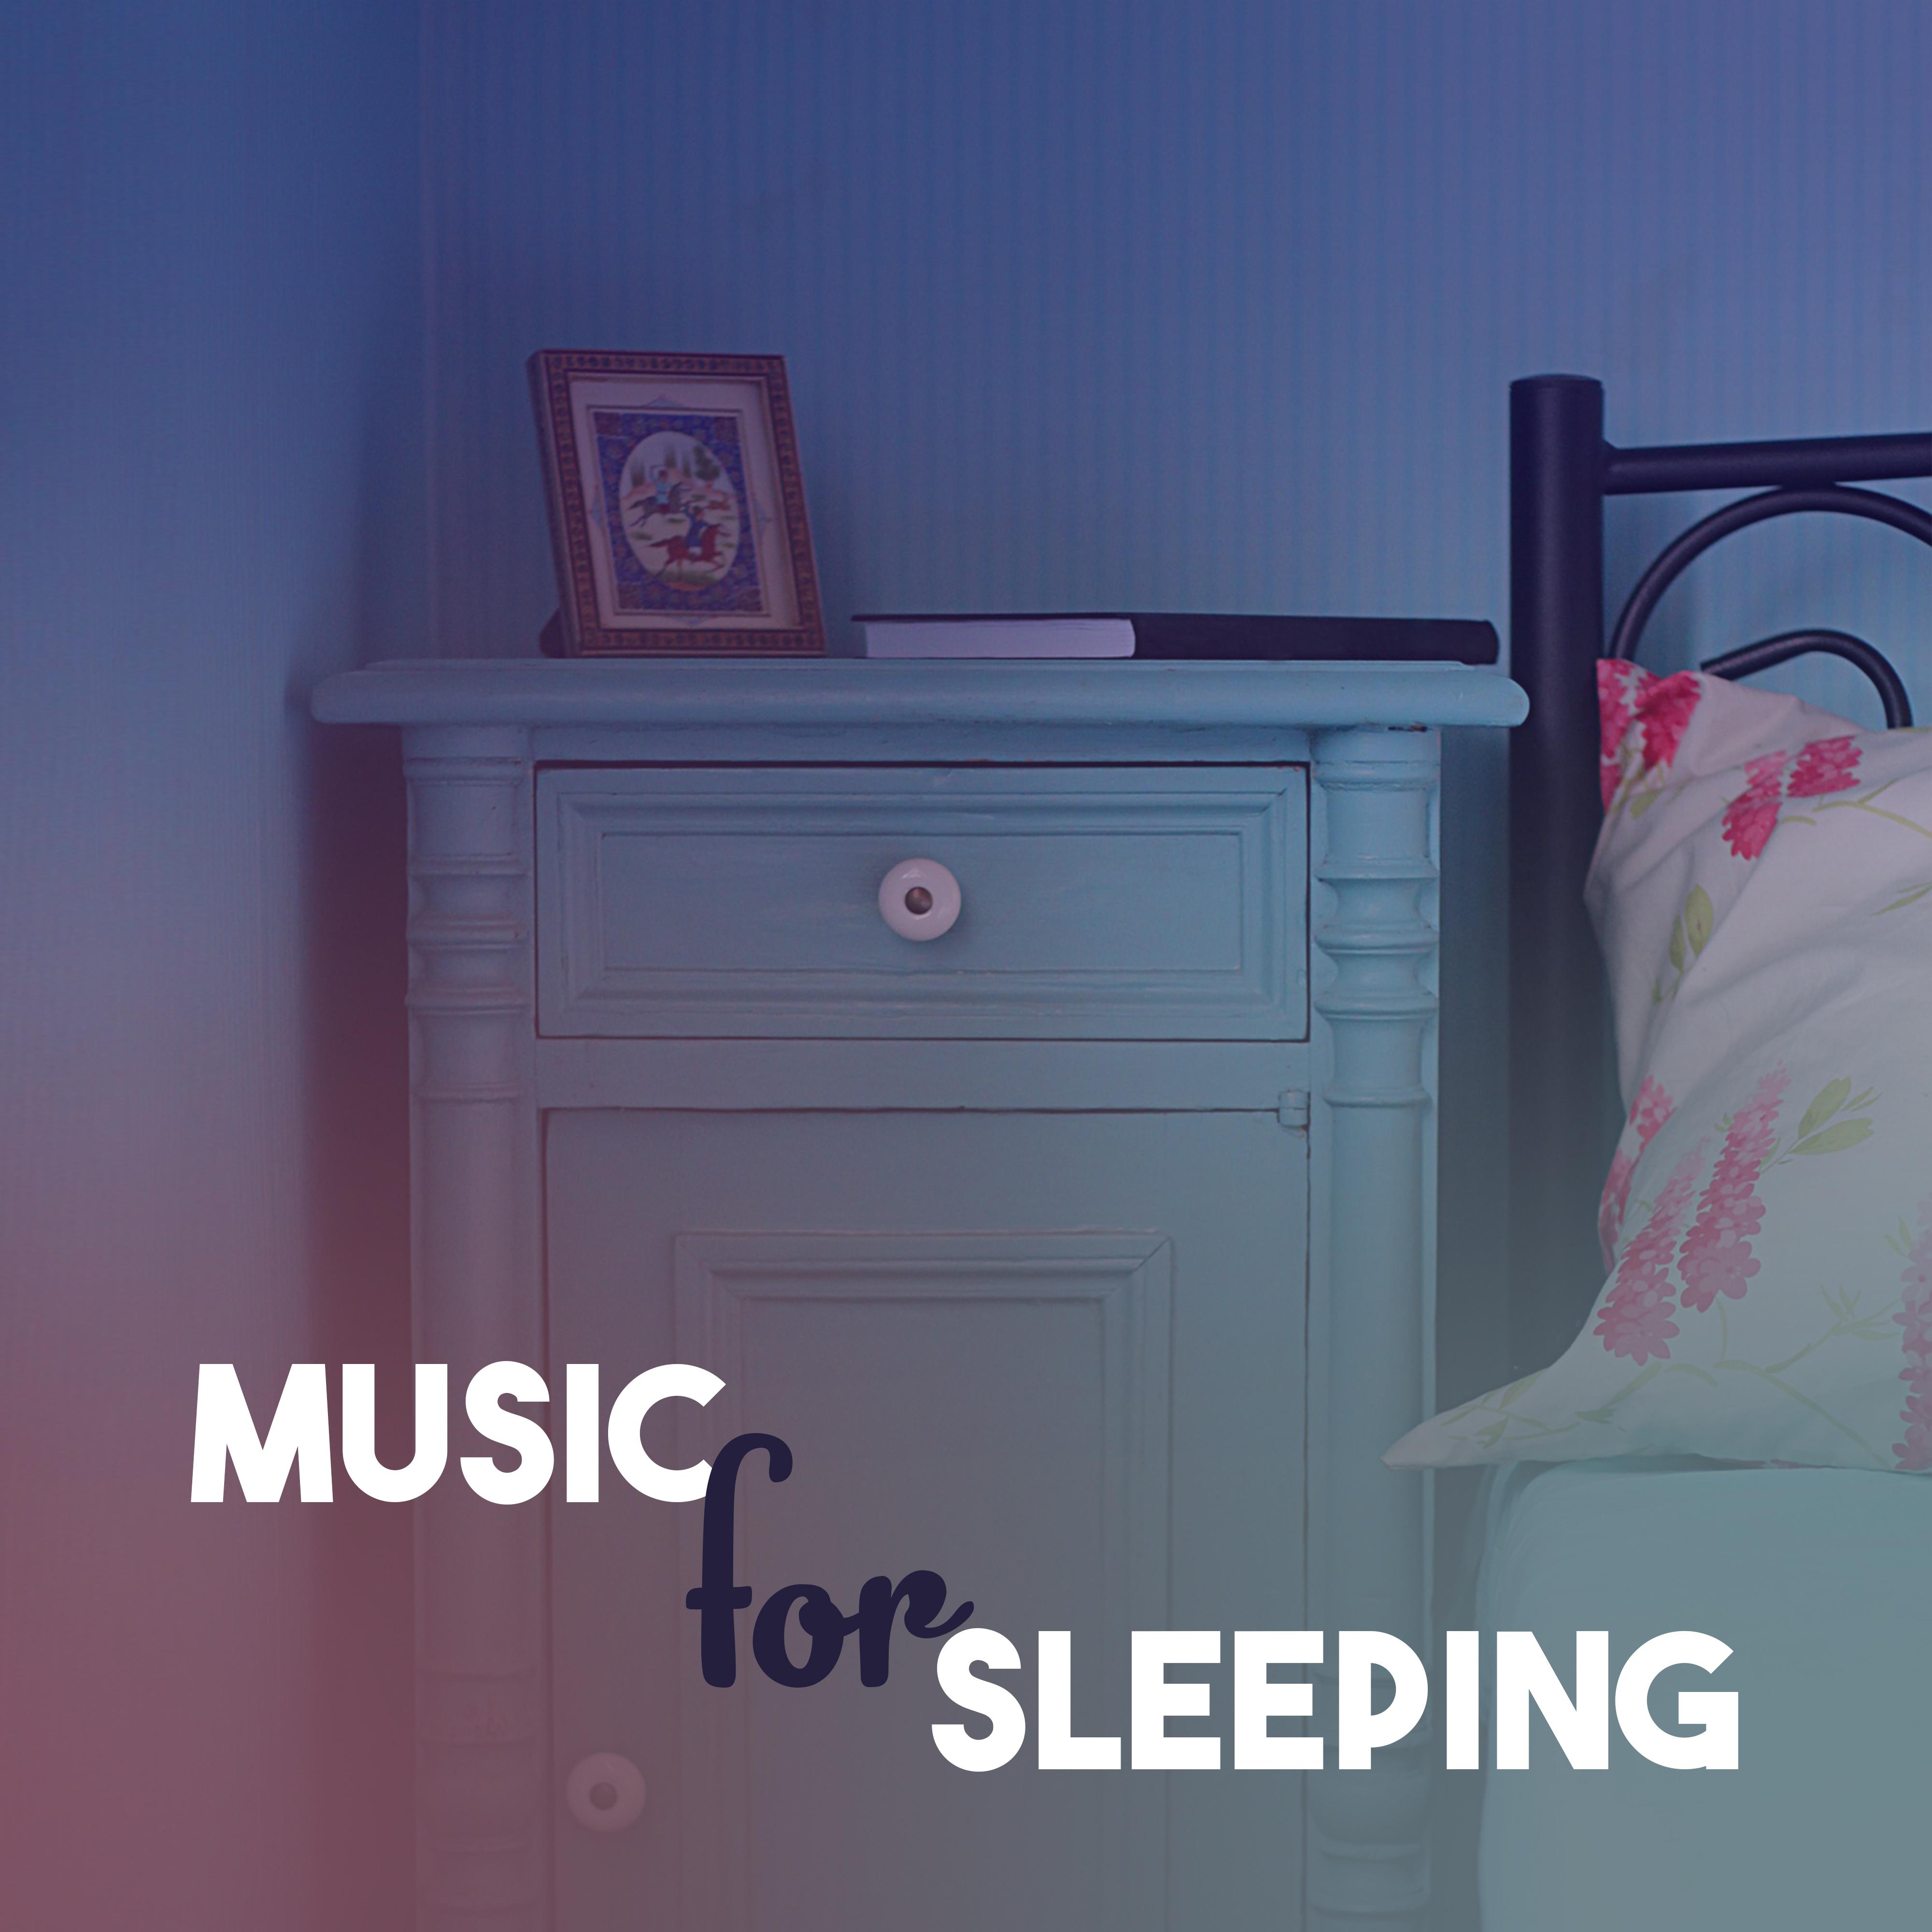 Music for Sleeping – Soft Sounds to Bed, Sweet Dreams, Peaceful Night, Healing Lullabies for Sleep, Calm Mind